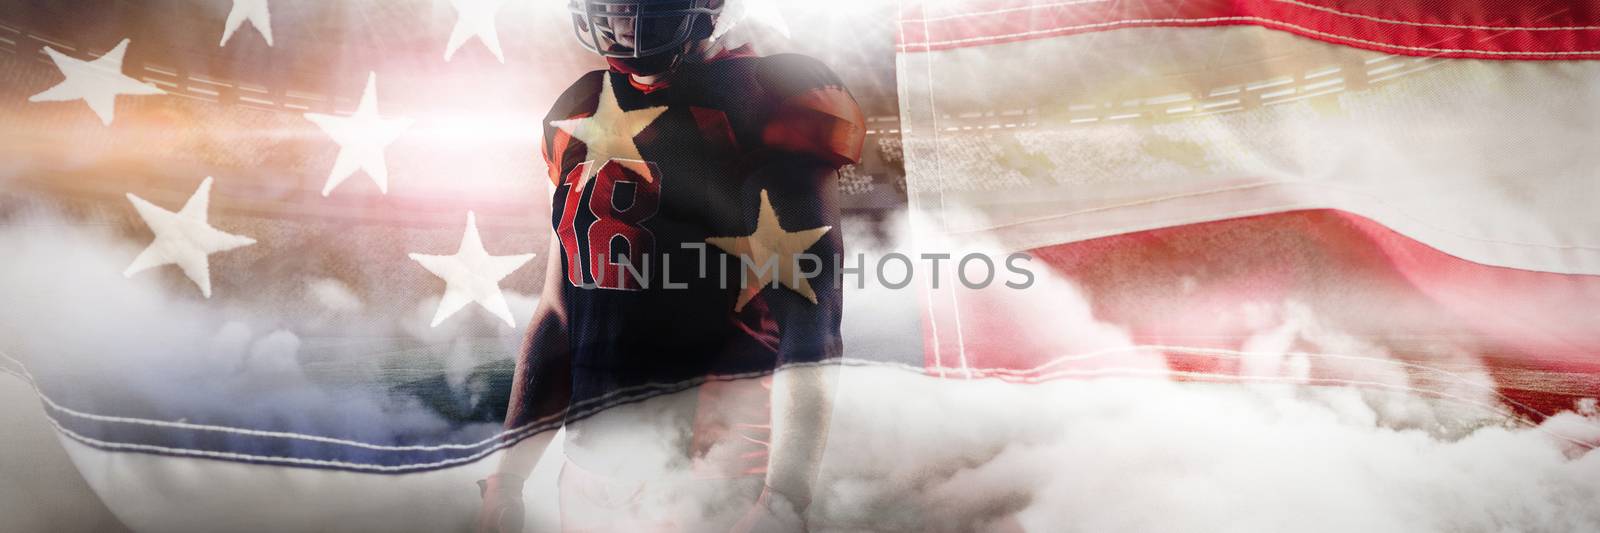 American football player standing with rugby helmet against full frame of american flag